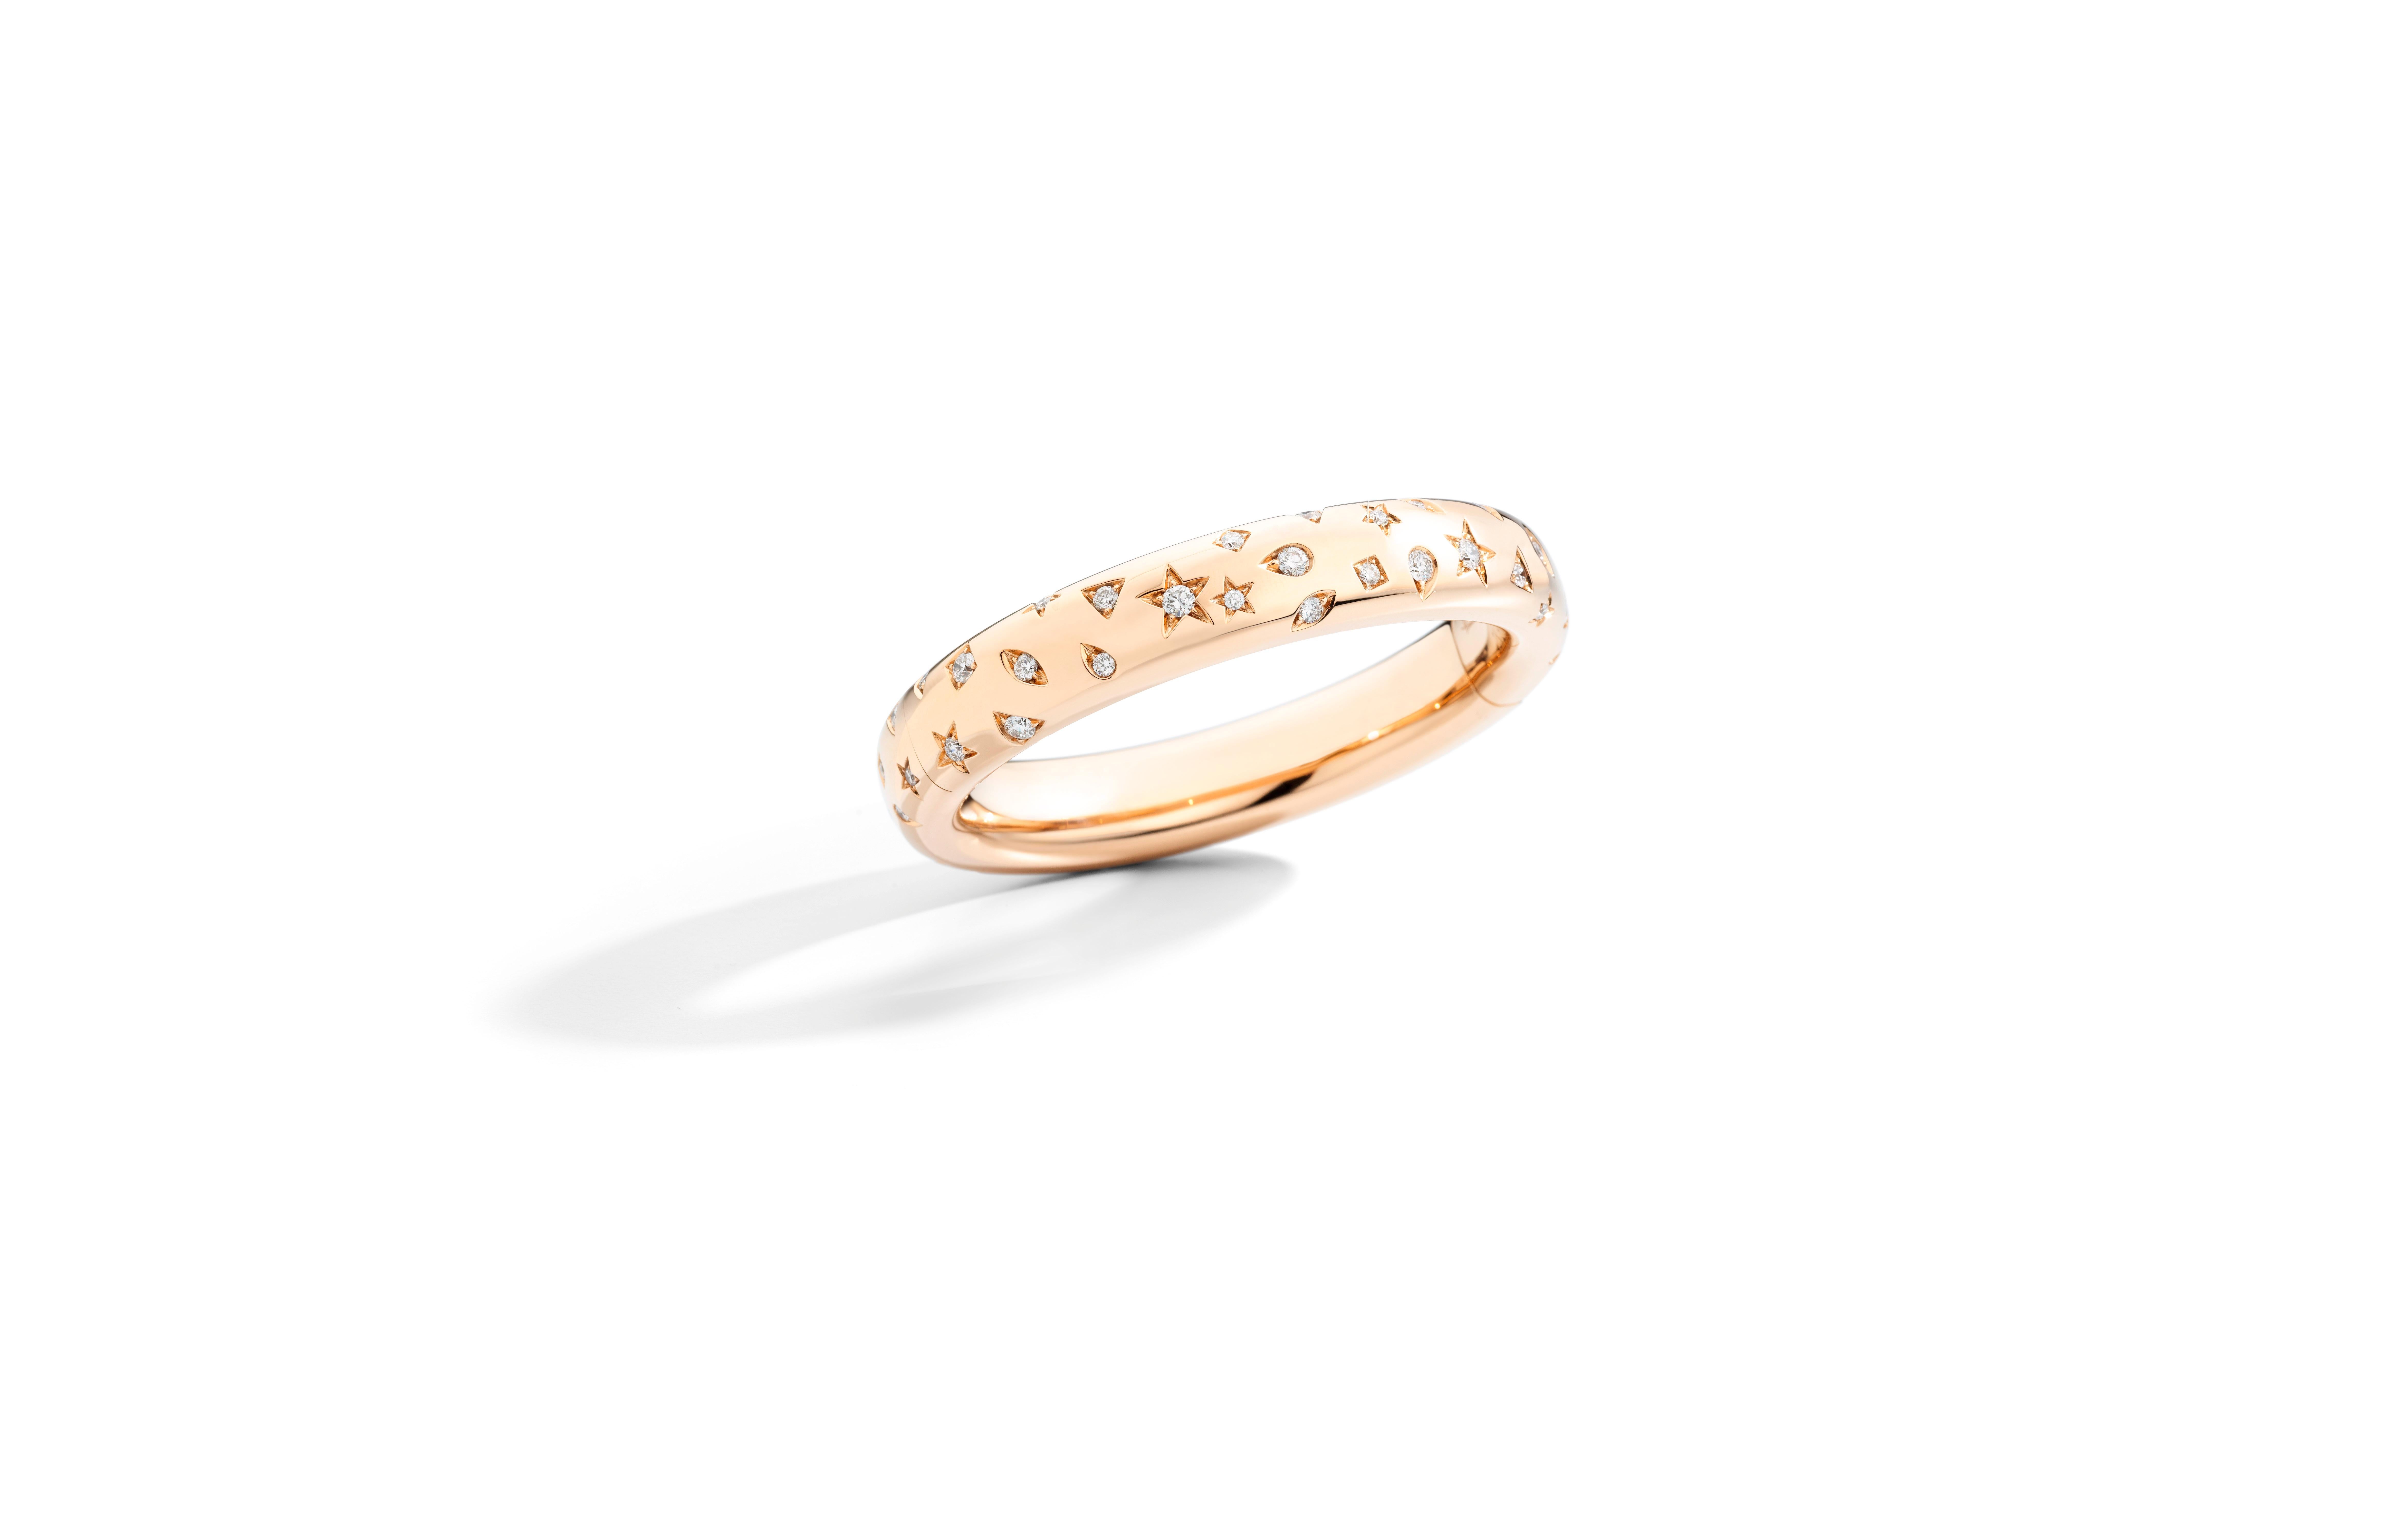 Honoring Pomellato’s goldsmith heritage, ICONICA shines in bold bracelets of sensual rose gold. Daring, lightweight and stackable, this anniversary collection may be mixed-and-matched per the Pomellato spirit. 18k rose gold with pave set diamonds